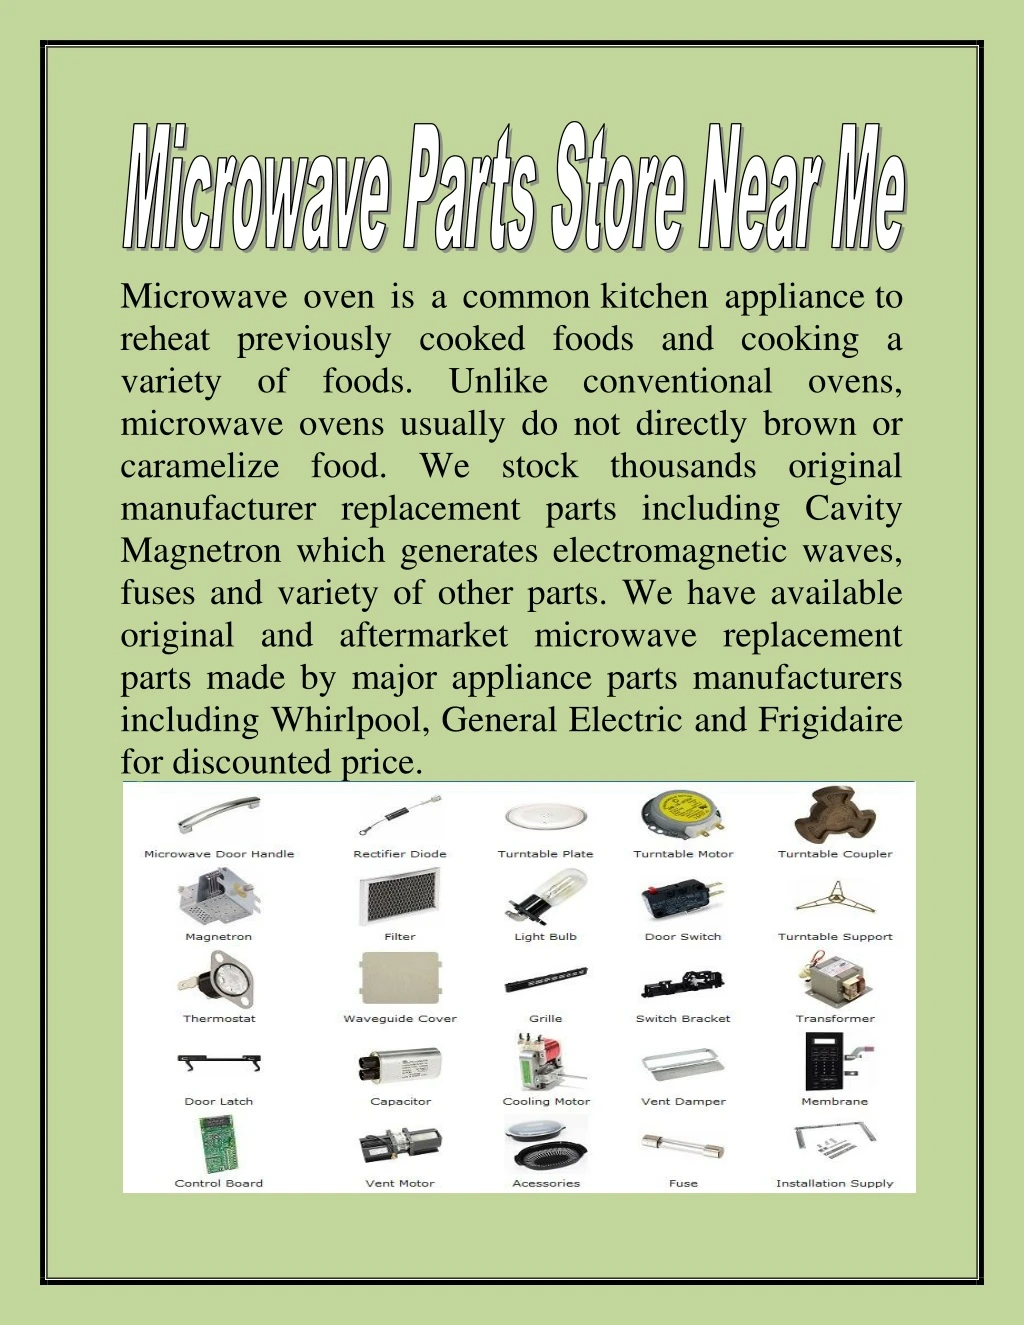 microwave oven is a common kitchen appliance